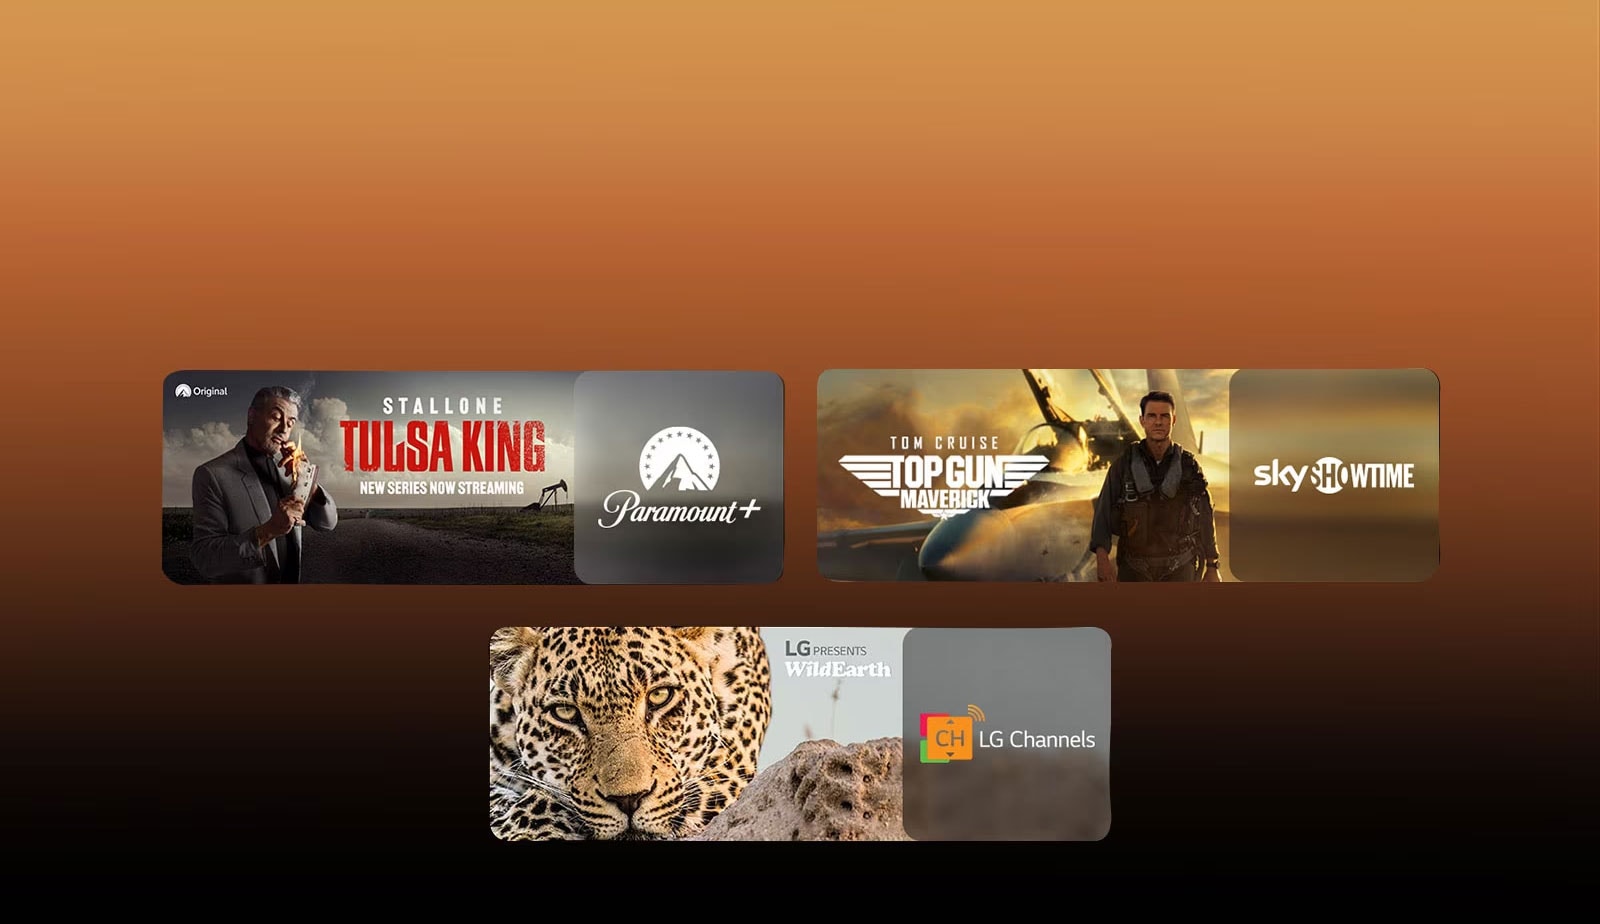 There are logos of streaming service platforms and matching footages right next to each logo. There are images of Paramount+'s Tulsa King,ky showtime's TOP GUN, and LG CHANNELS' leopard.